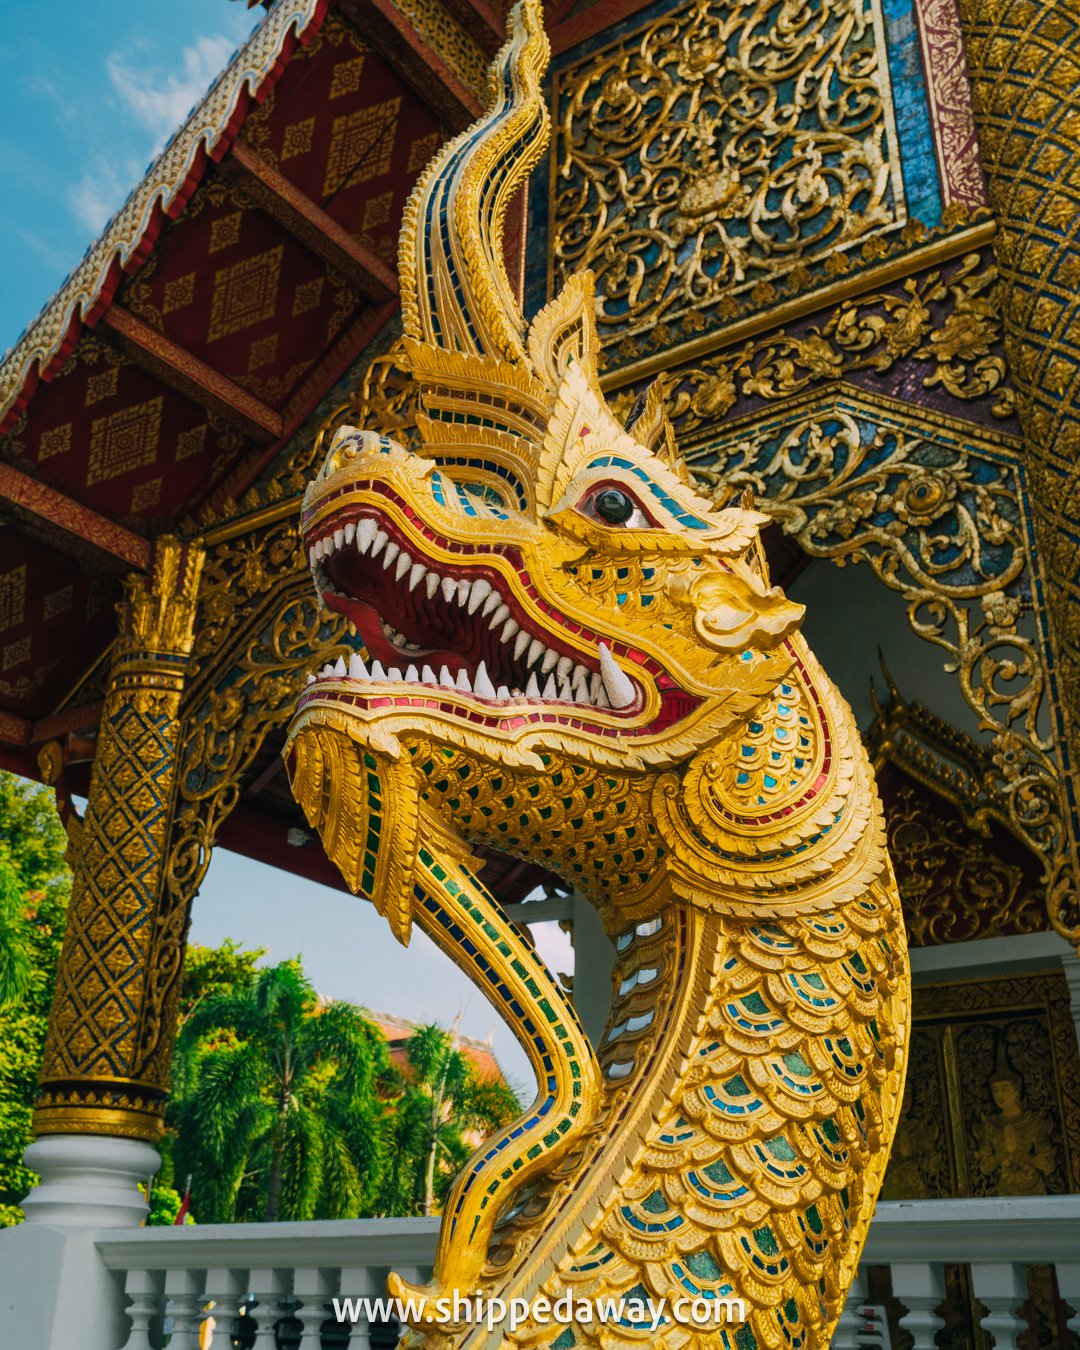 top things to do in Chiang Mai, Chiang Mai attractions - impressive golden dragon of Wat Phra Singh in Old City of Chiang Mai